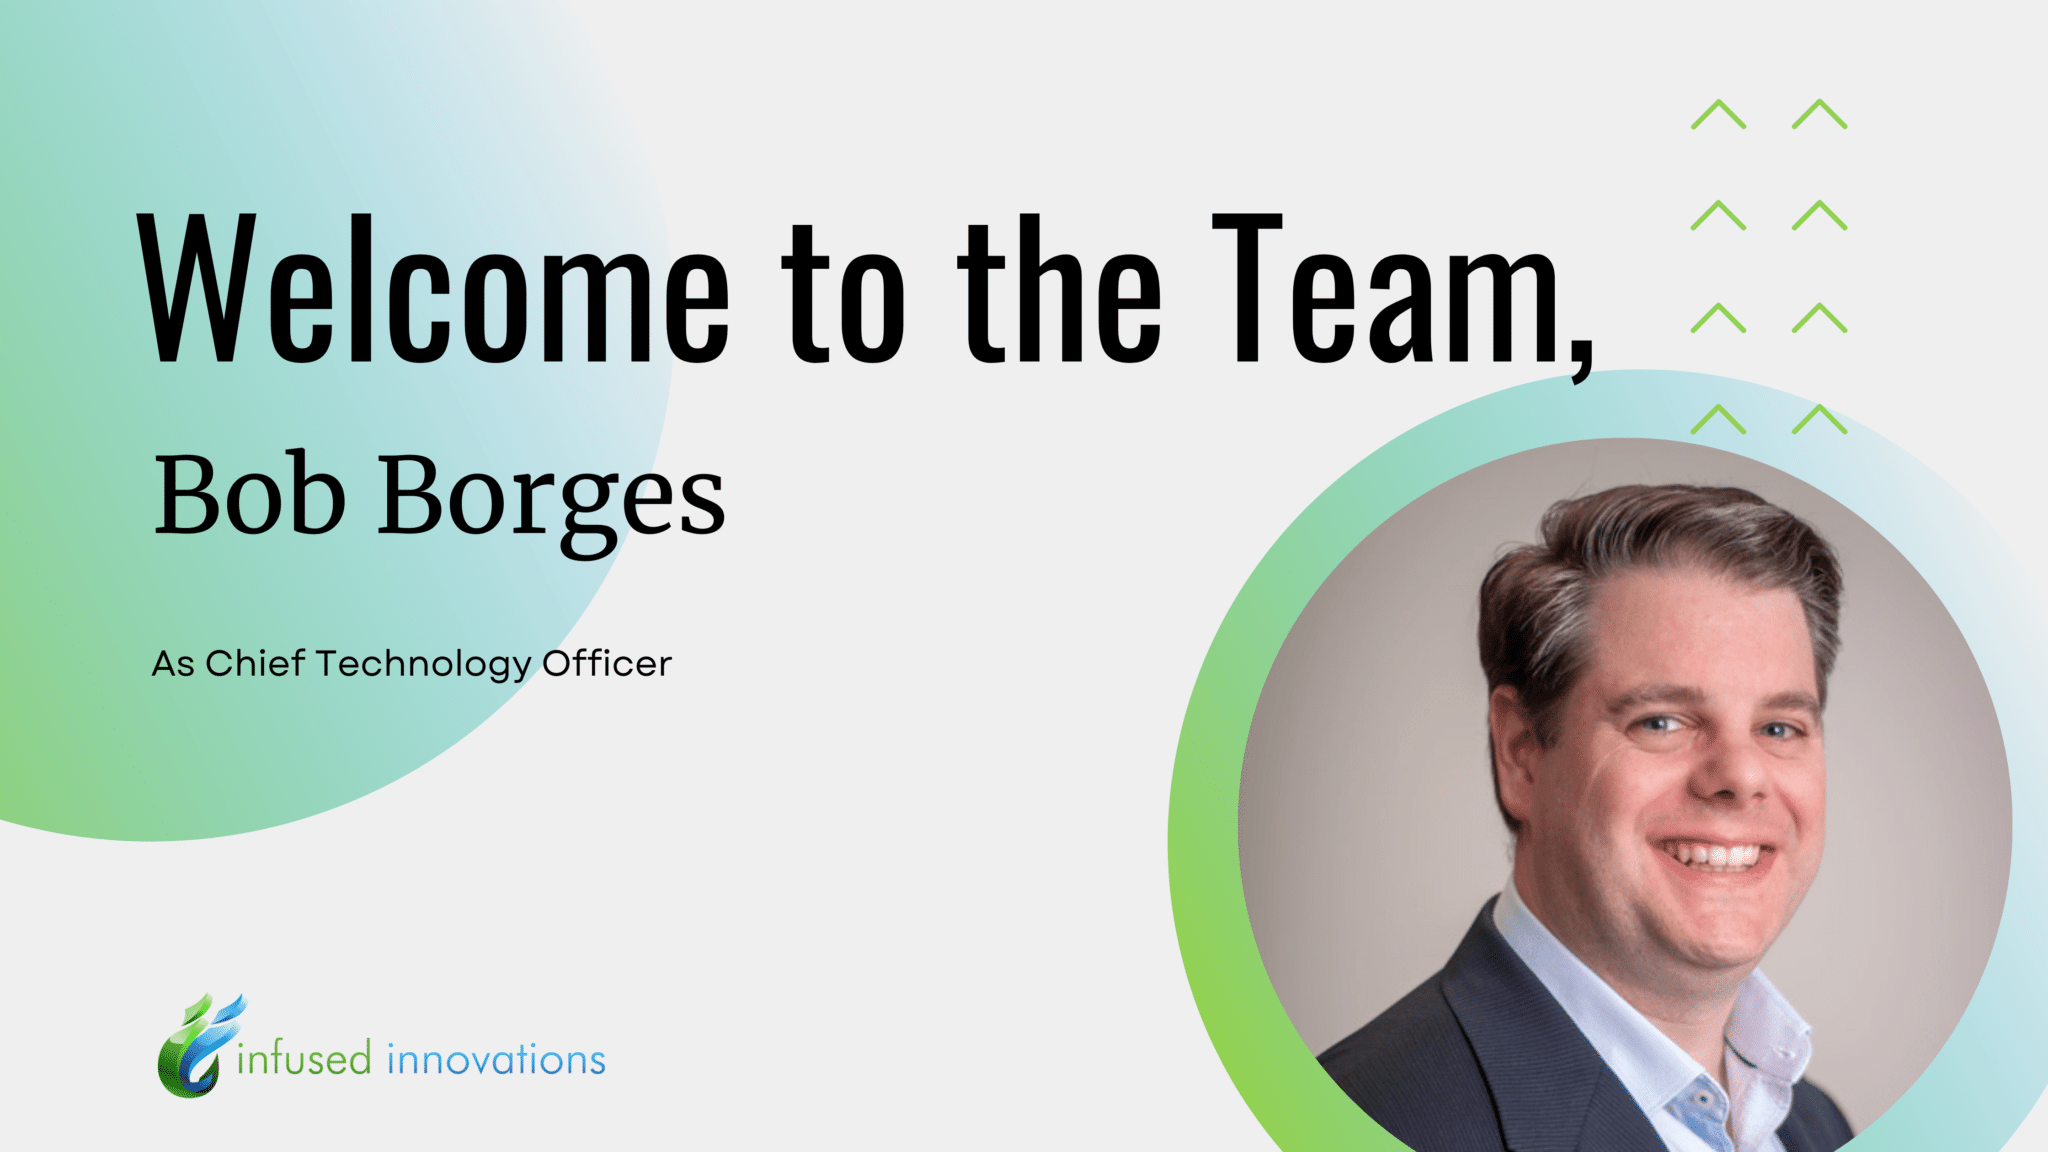 An image sharing Bob Borges new role as Chief Technology Officer